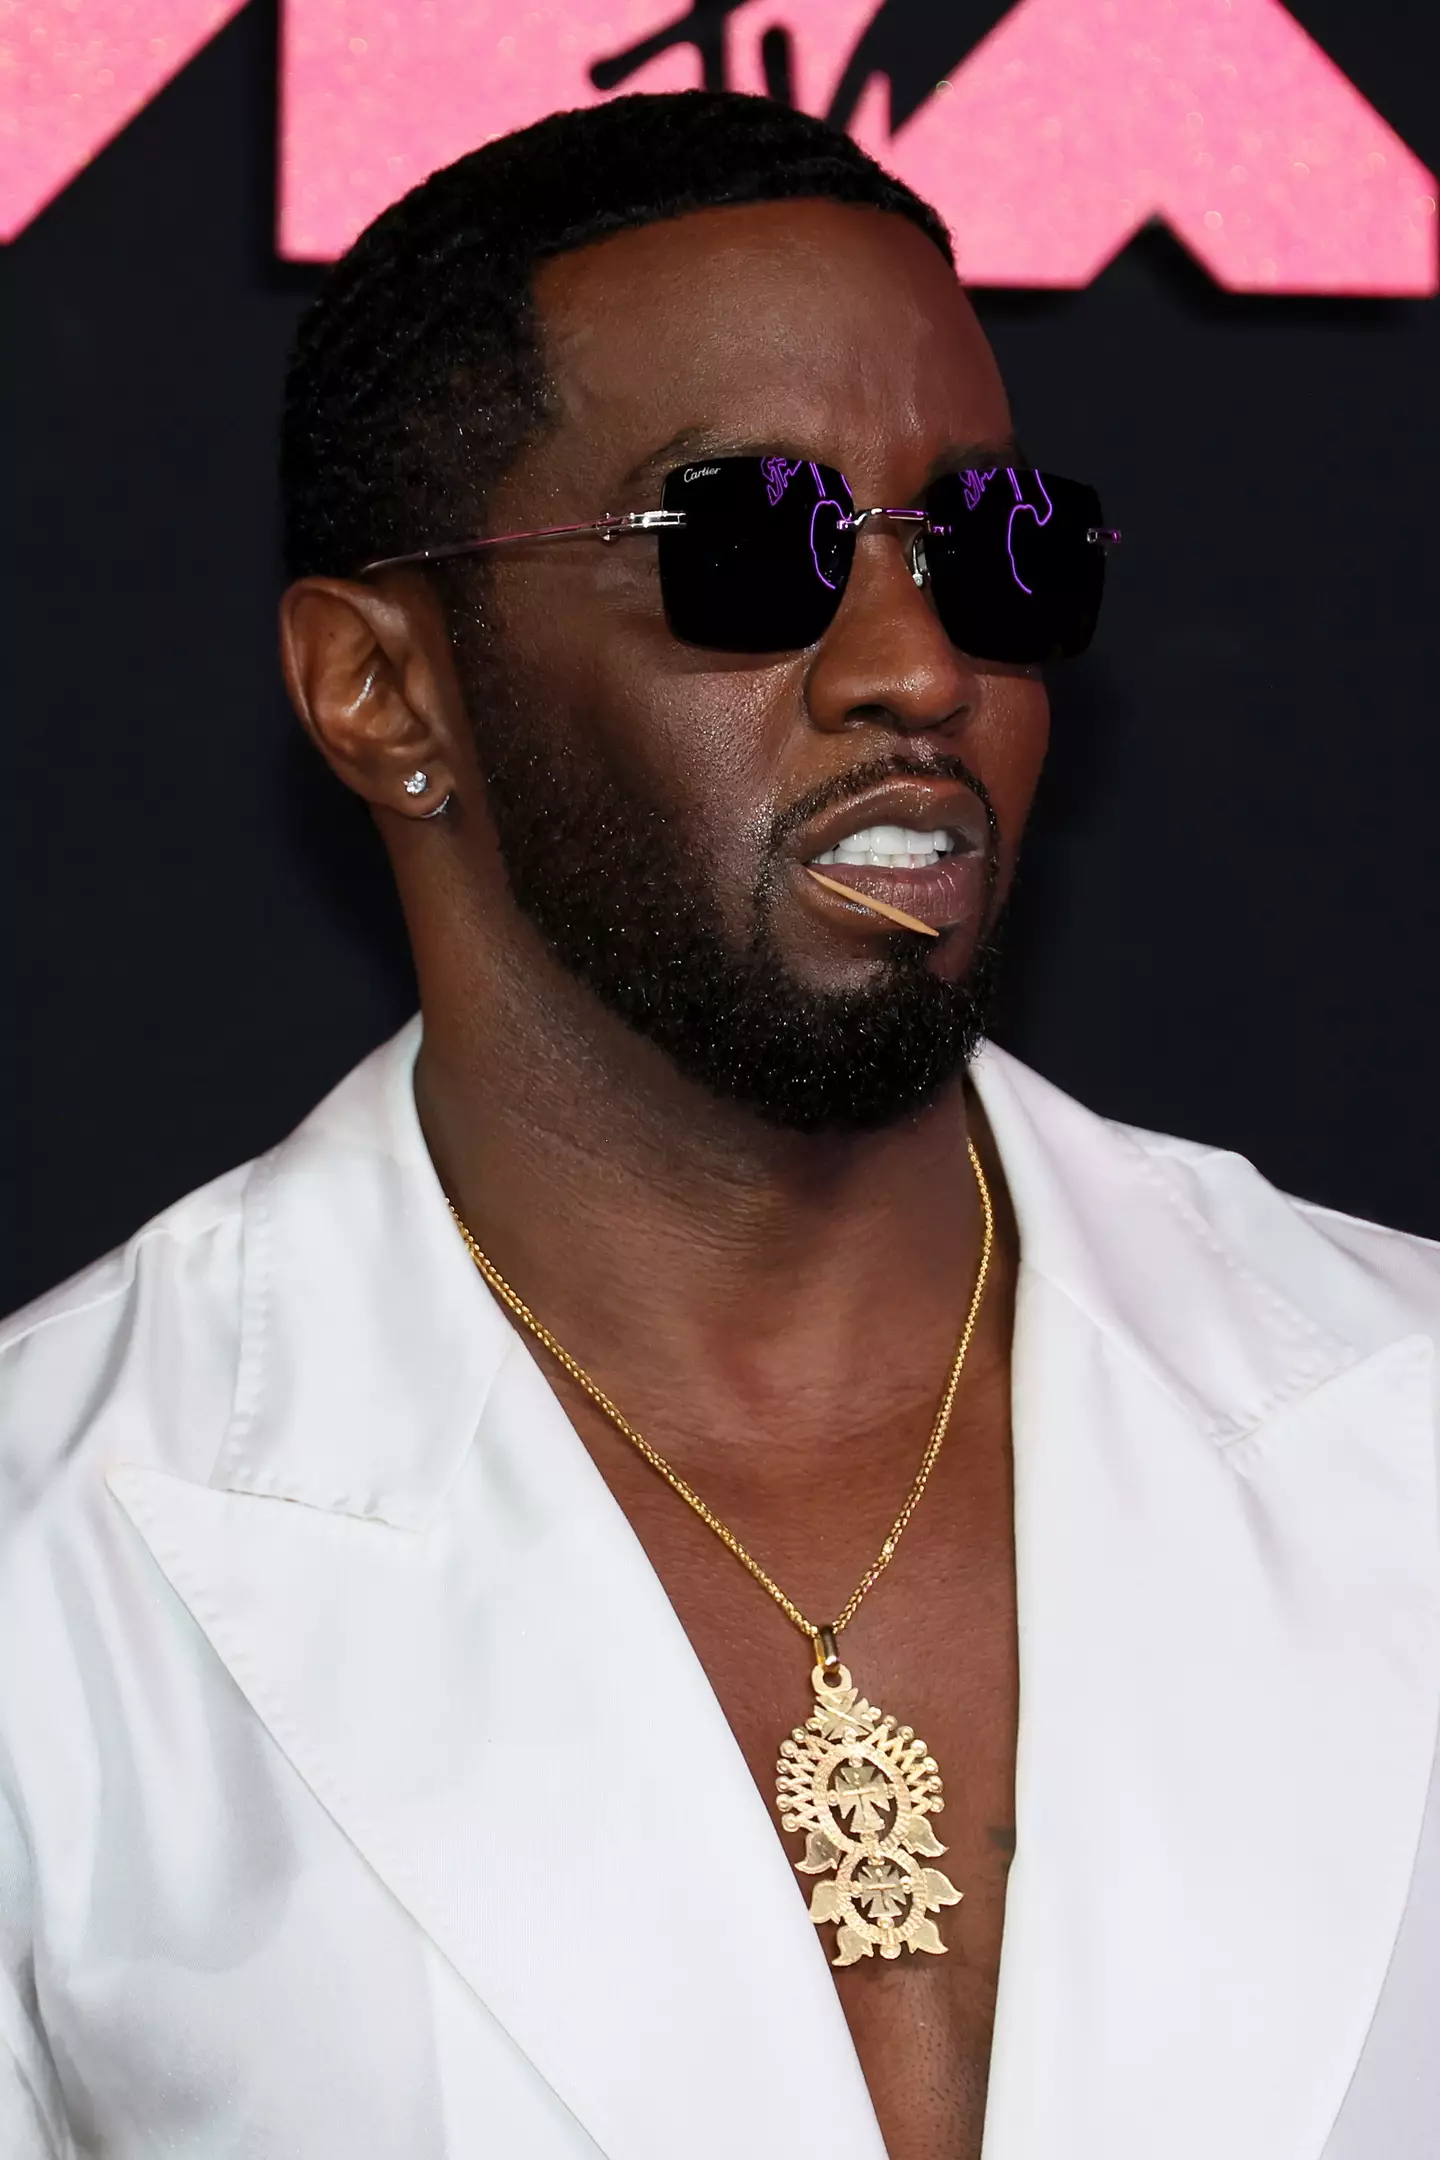 Diddy has been accused of sexually assaulting a woman in a civil lawsuit.